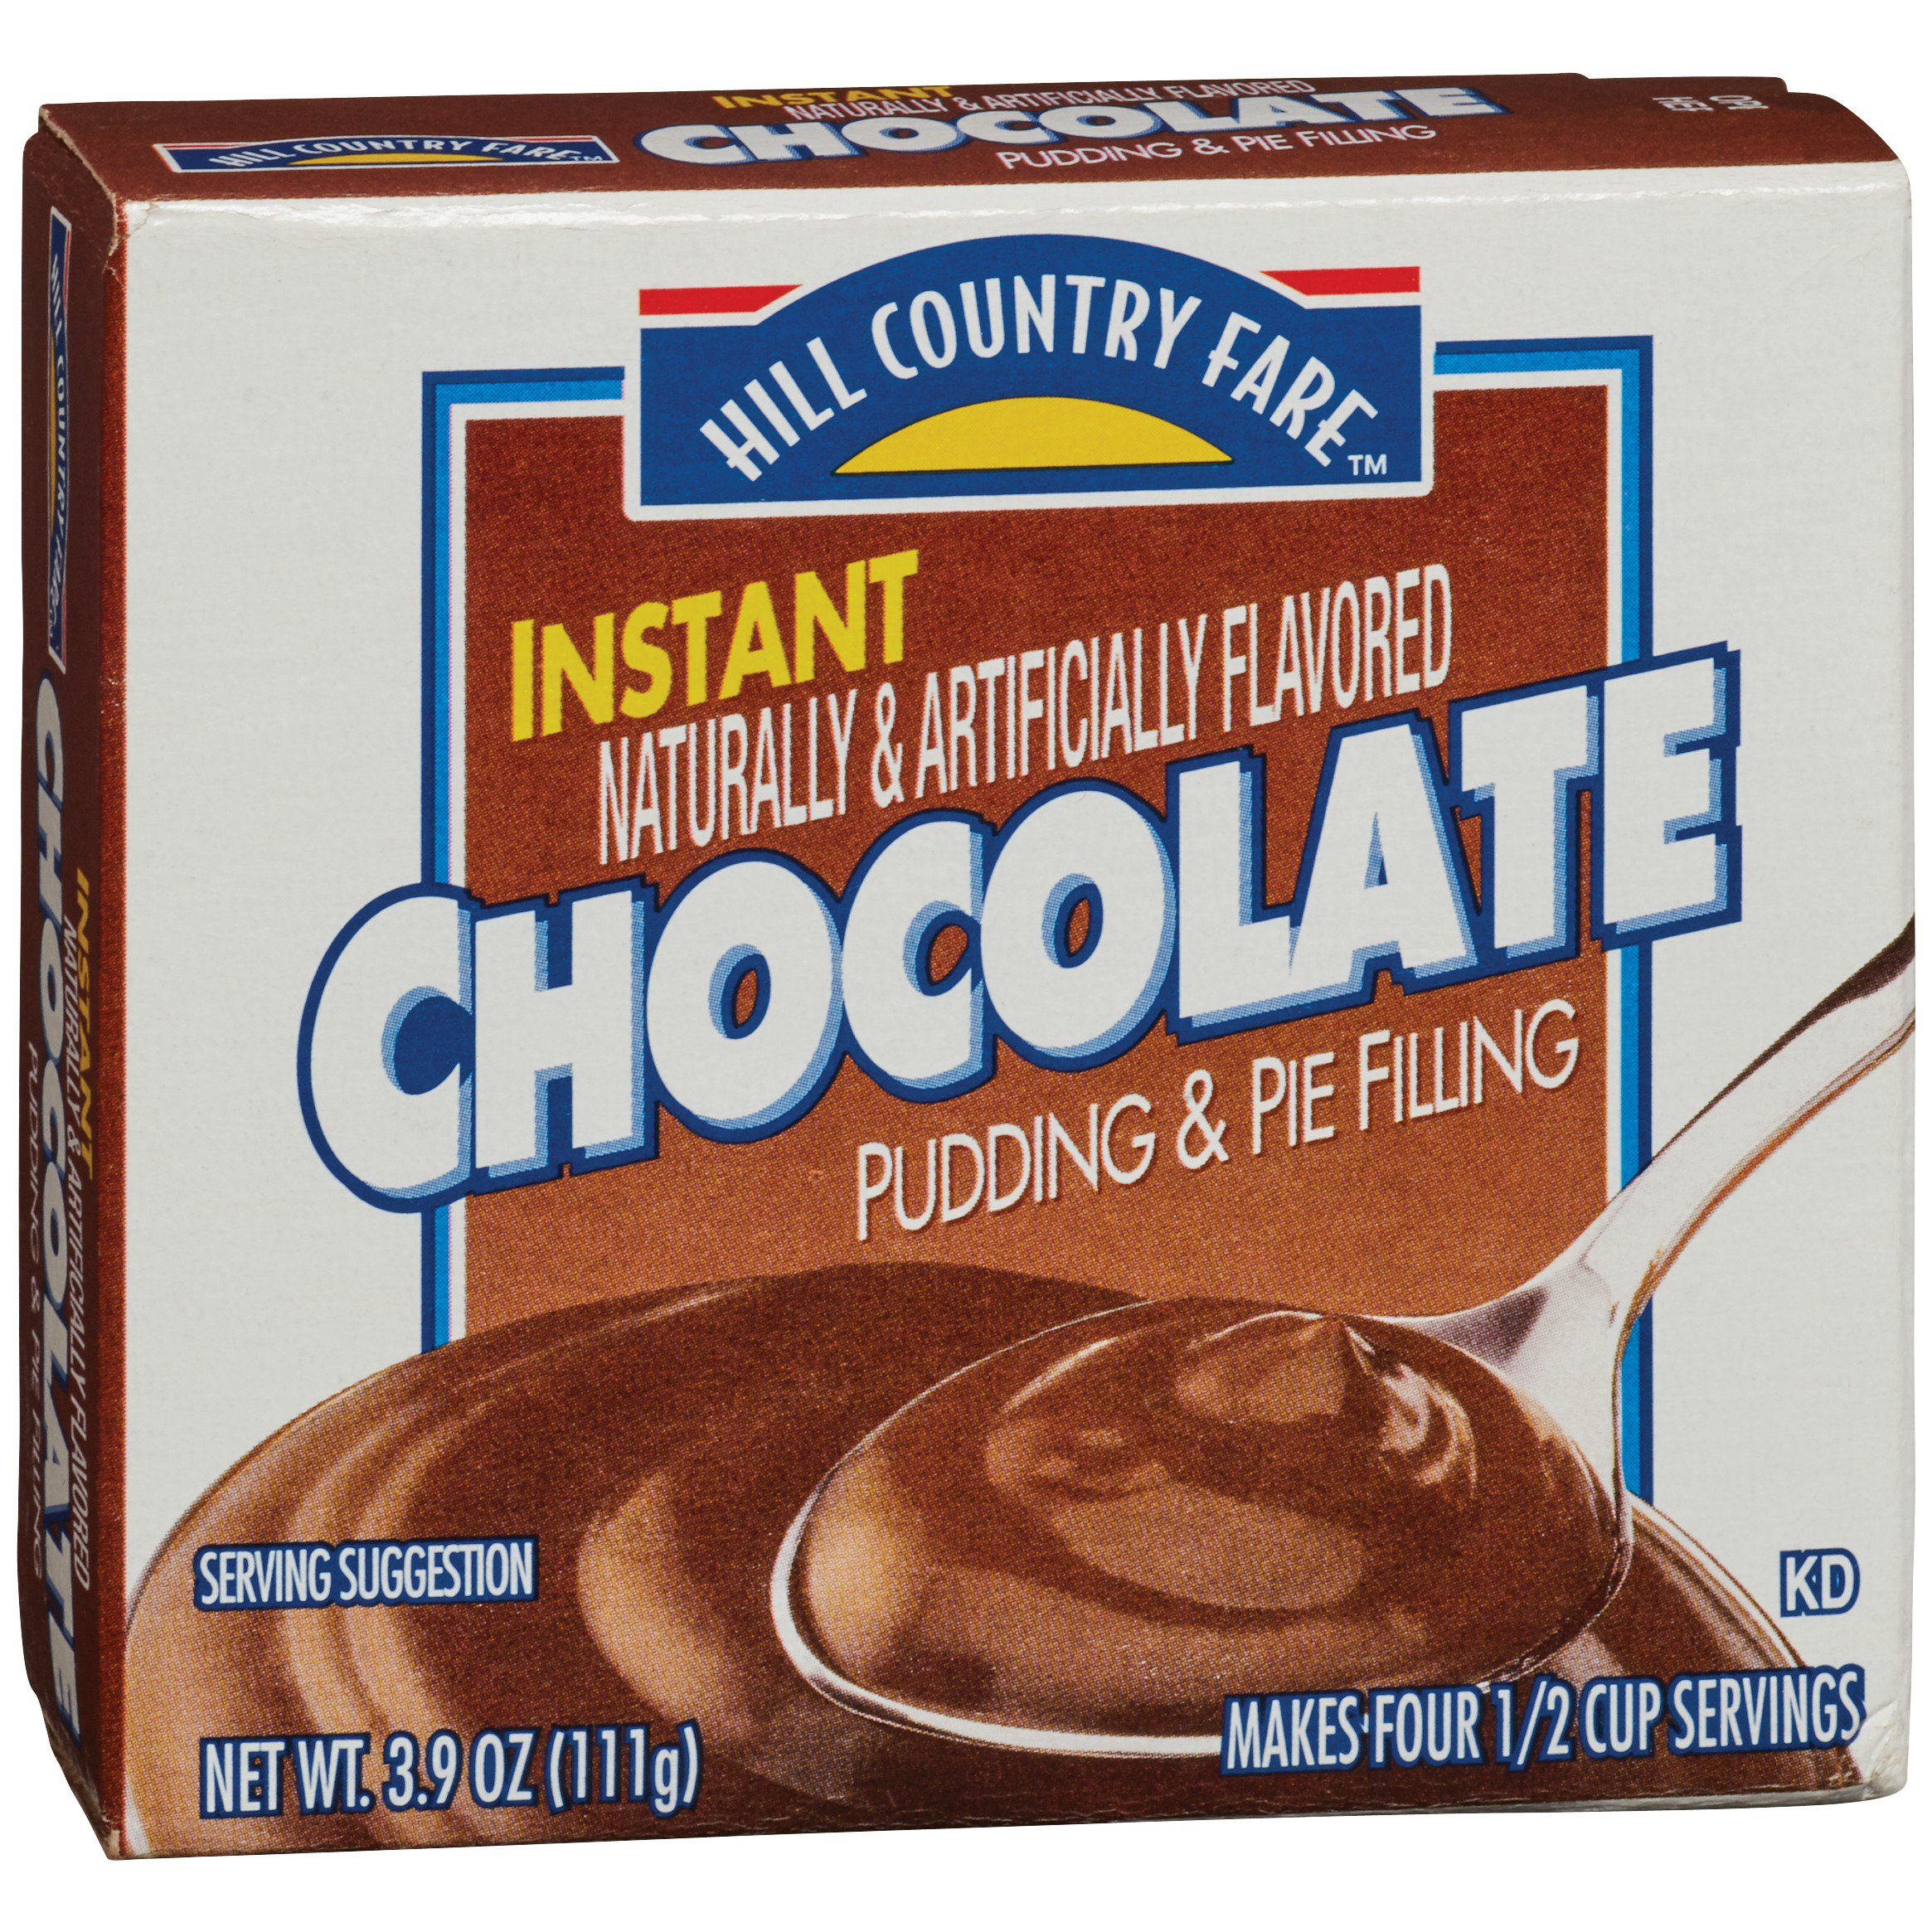 How many ounces are in a large box of Jell-O instant pudding?